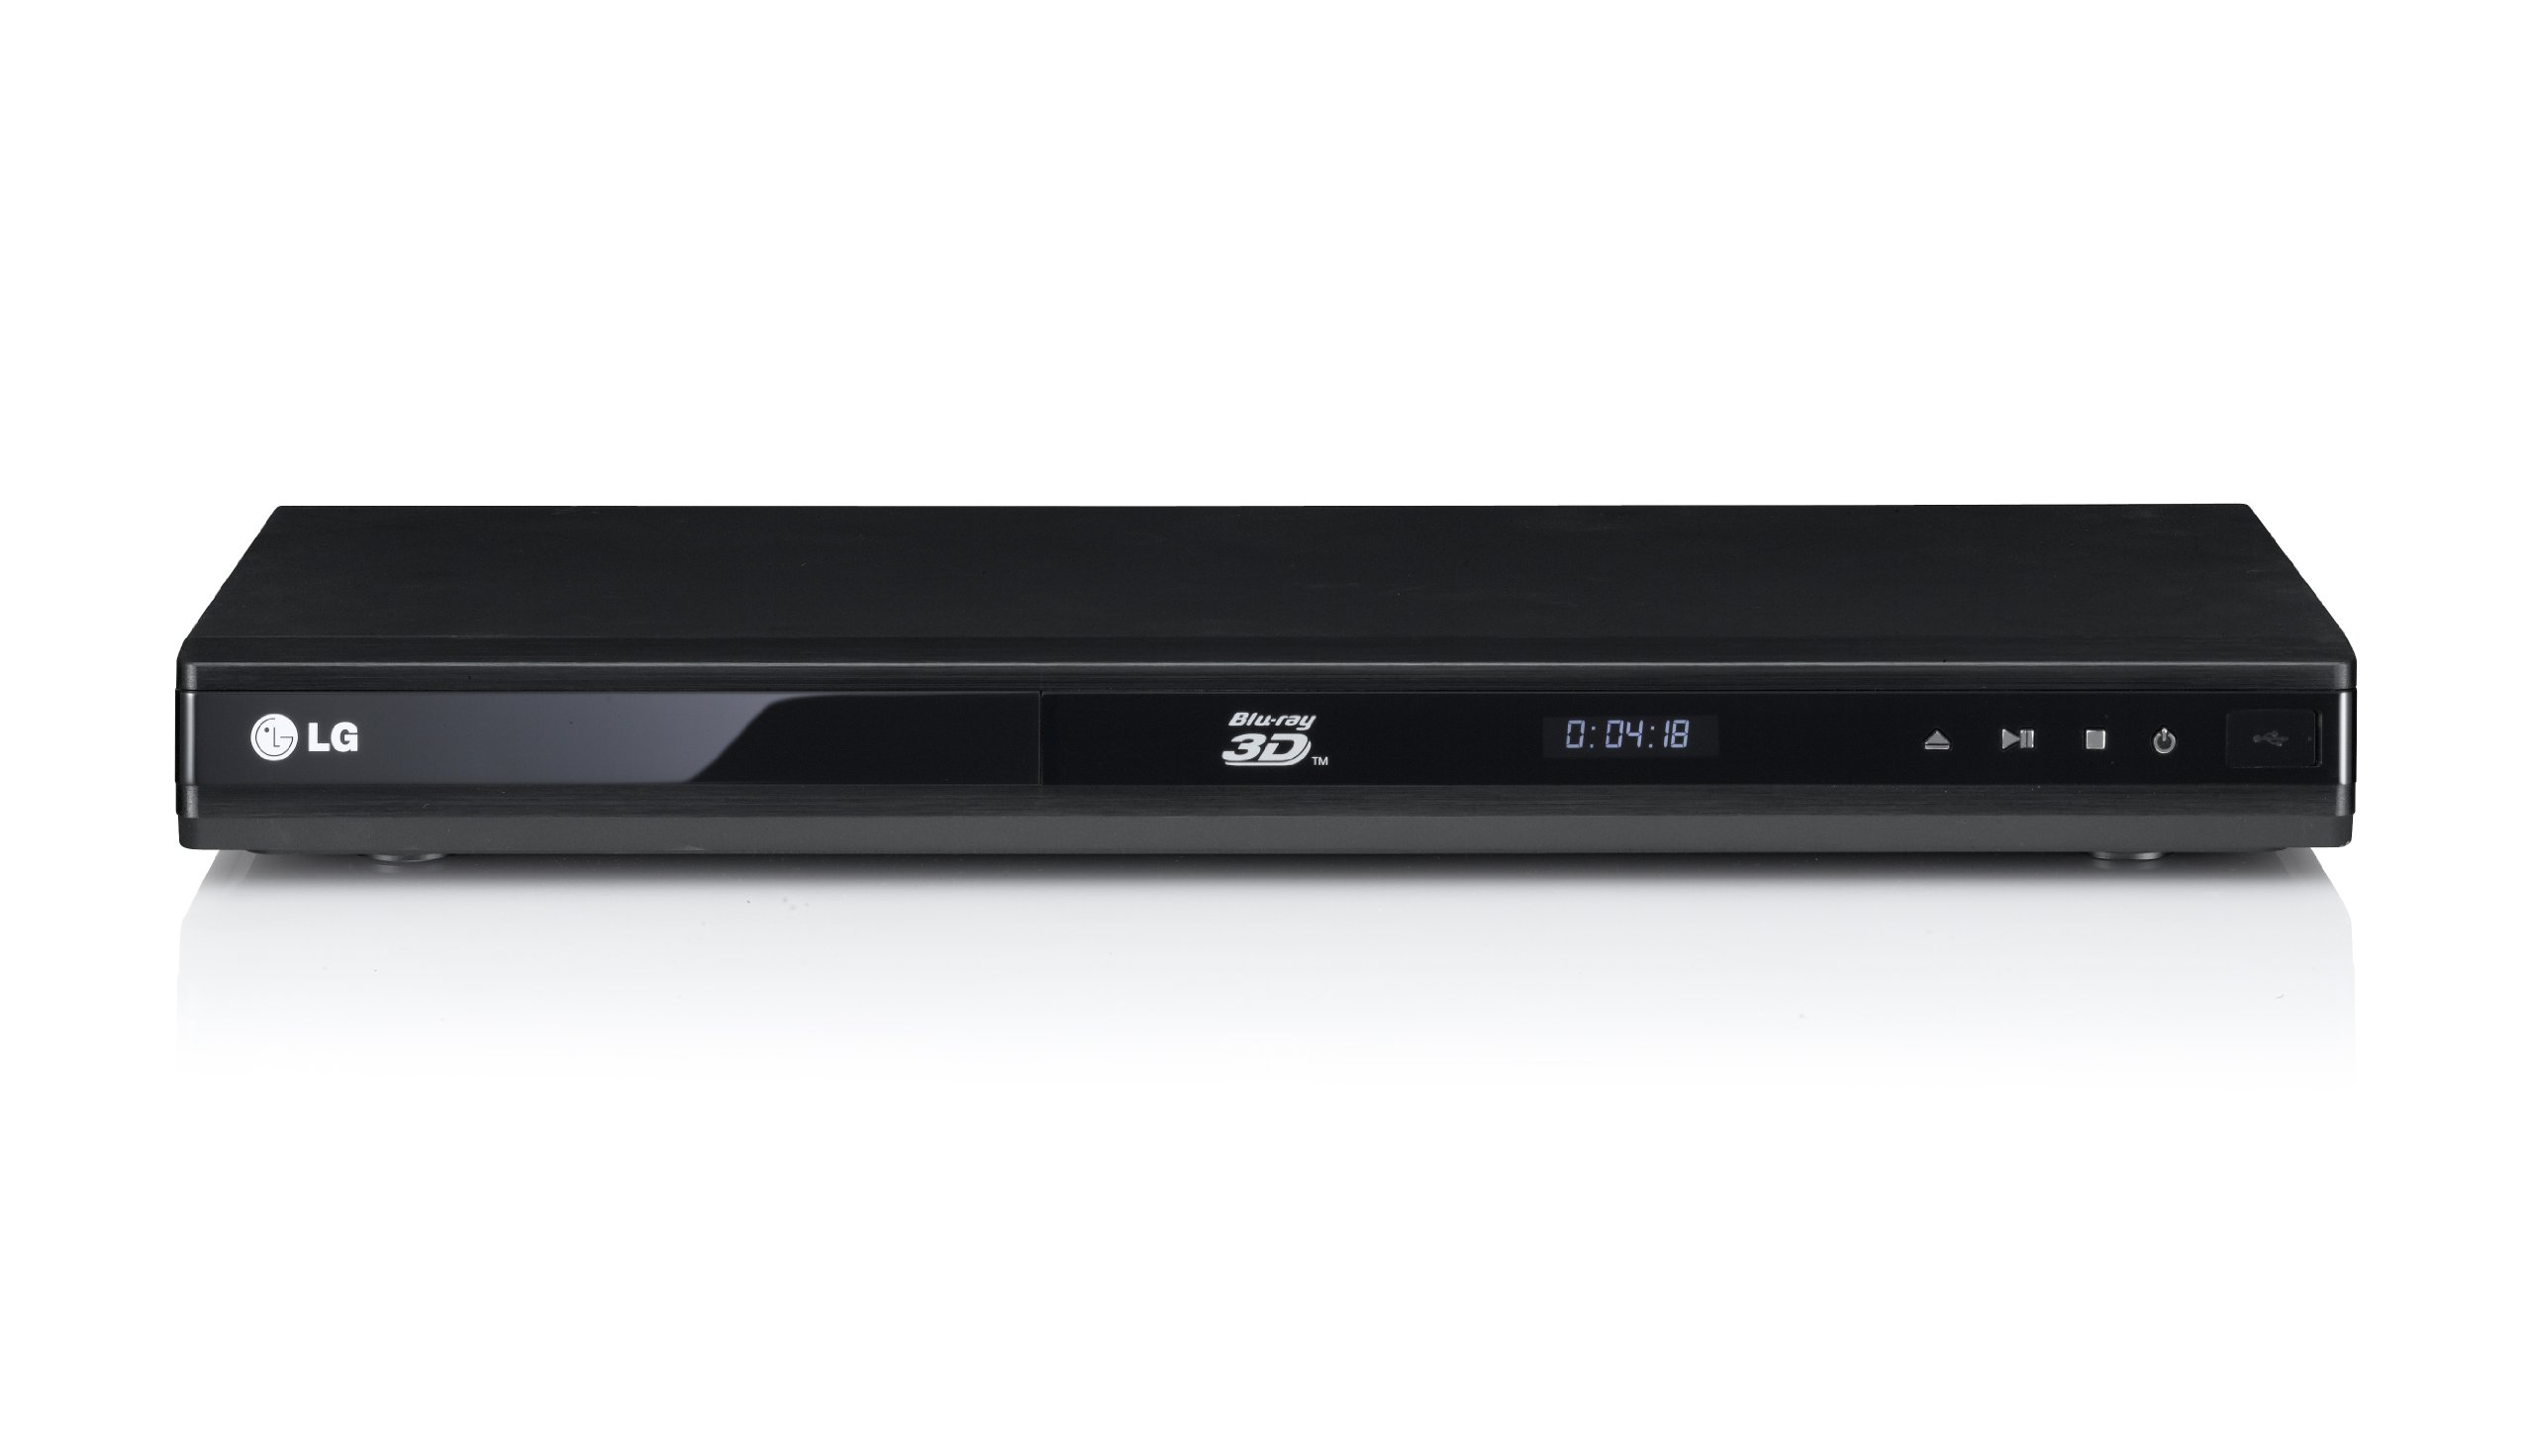 LG BP175: An Affordable DVD Player with High-End Capabilities